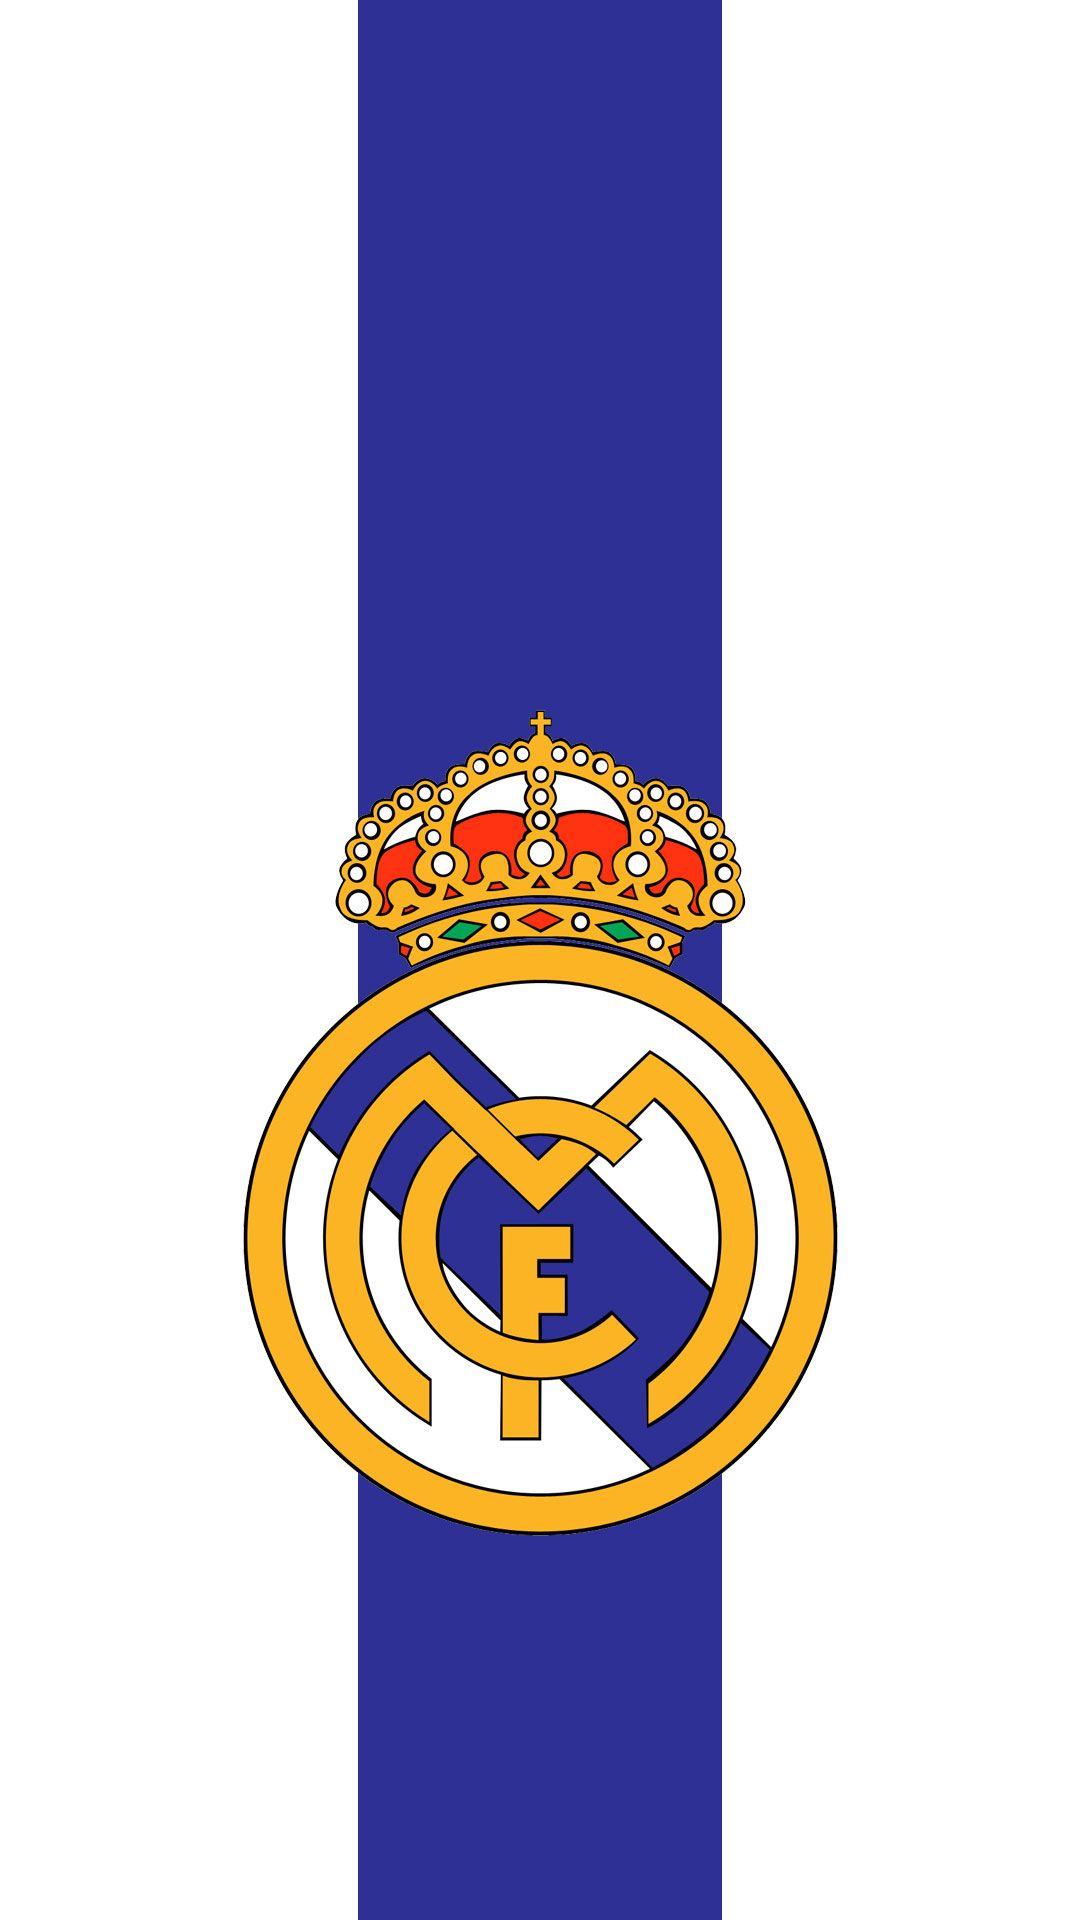 Real Madrid for Android Wallpaper HD. Madrid wallpaper, Real madrid logo wallpaper, Real madrid wallpaper